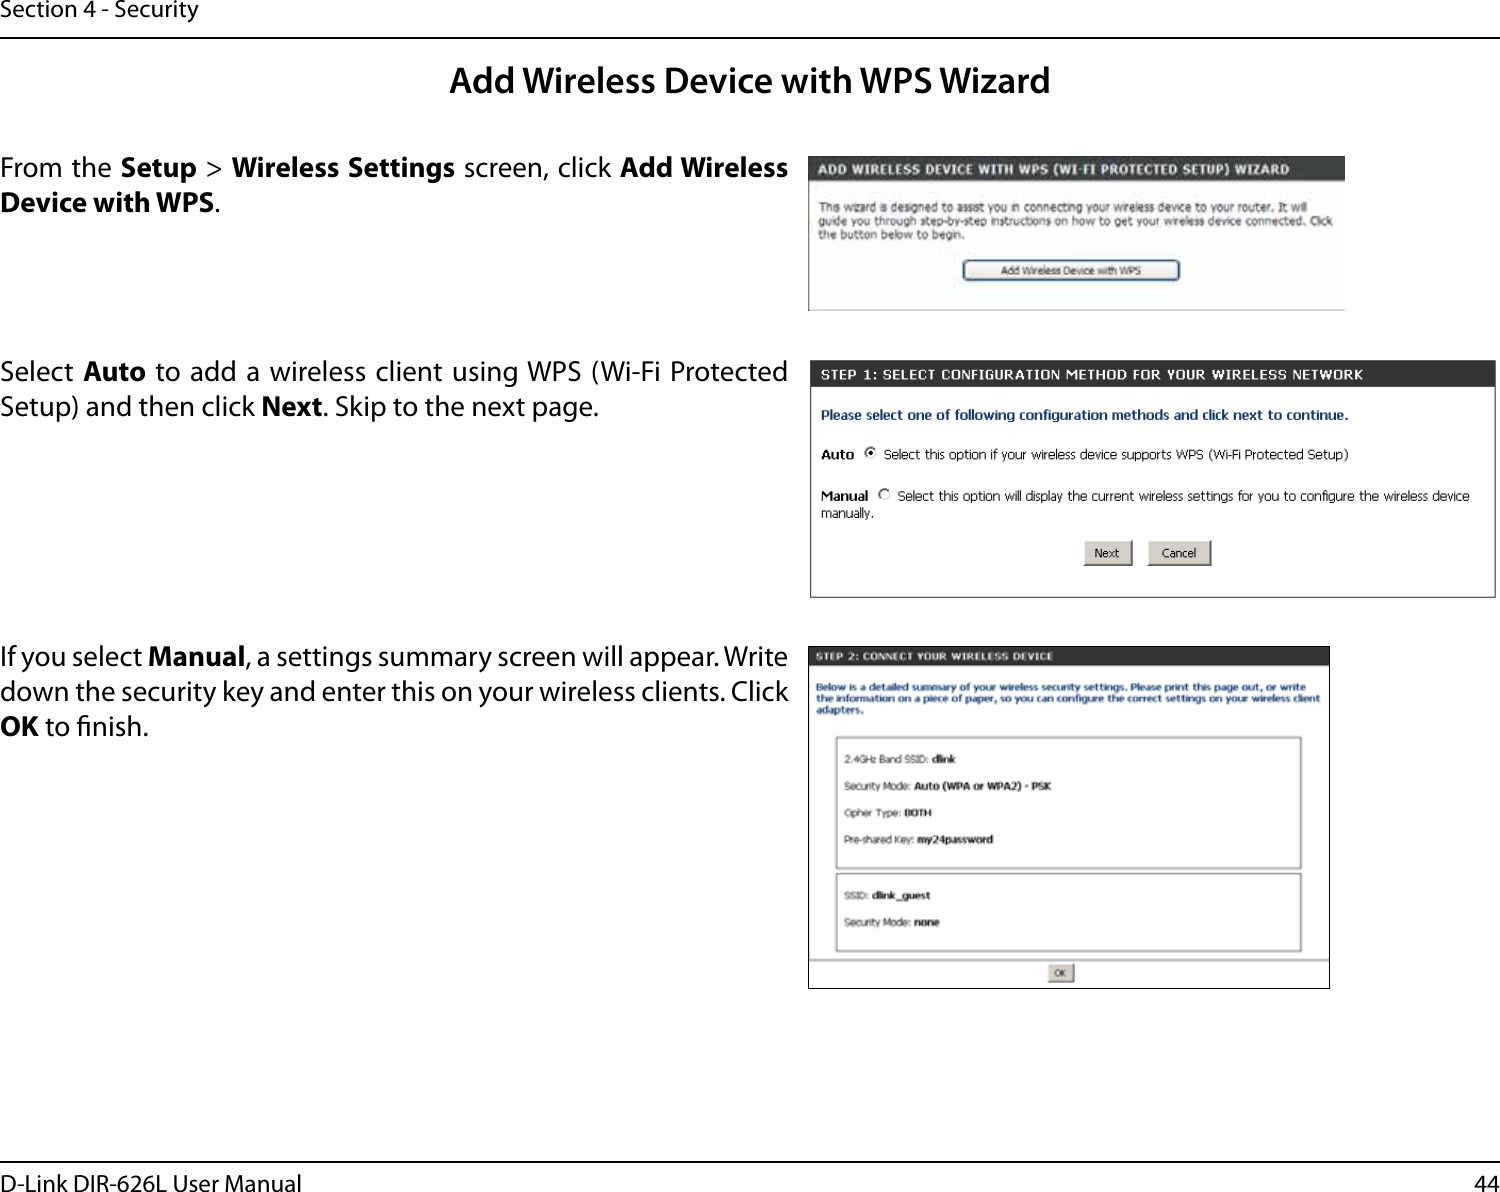 44D-Link DIR-626L User ManualSection 4 - SecurityFrom the Setup &gt; Wireless Settings screen, click Add Wireless Device with WPS.Add Wireless Device with WPS WizardIf you select Manual, a settings summary screen will appear. Write down the security key and enter this on your wireless clients. Click OK to nish.Select Auto to add a wireless client using WPS (Wi-Fi Protected Setup) and then click Next. Skip to the next page. 